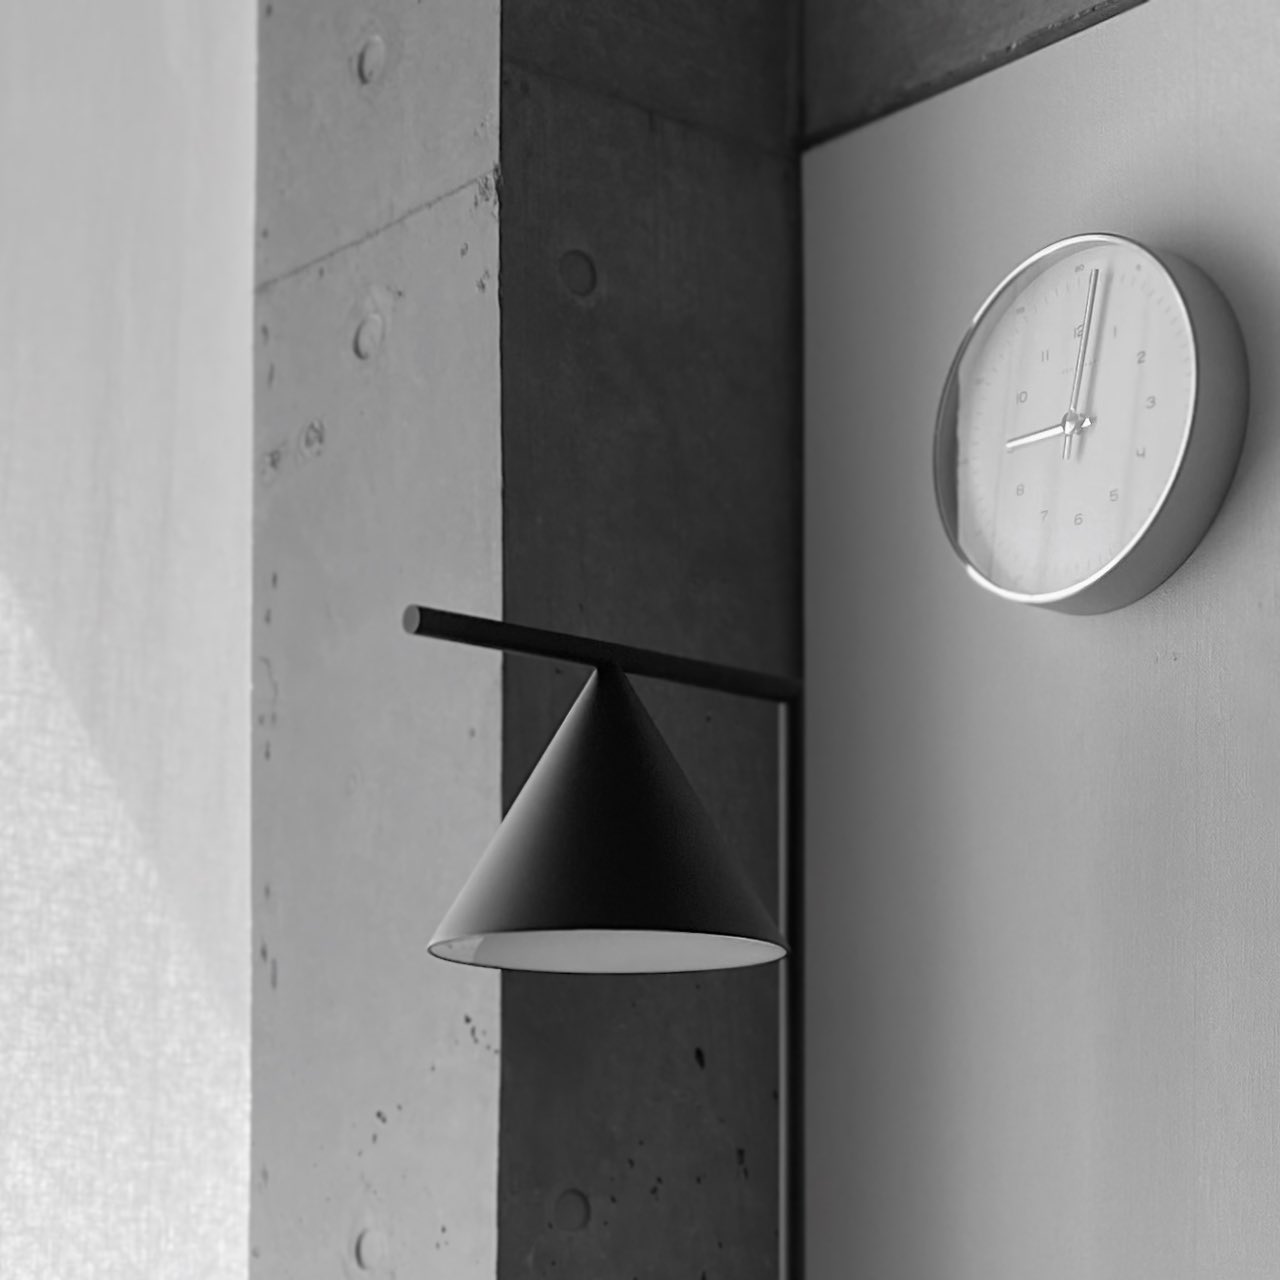 JUNGHANS / Wall Clock(by Max Bill)　49,000円ほどで購入